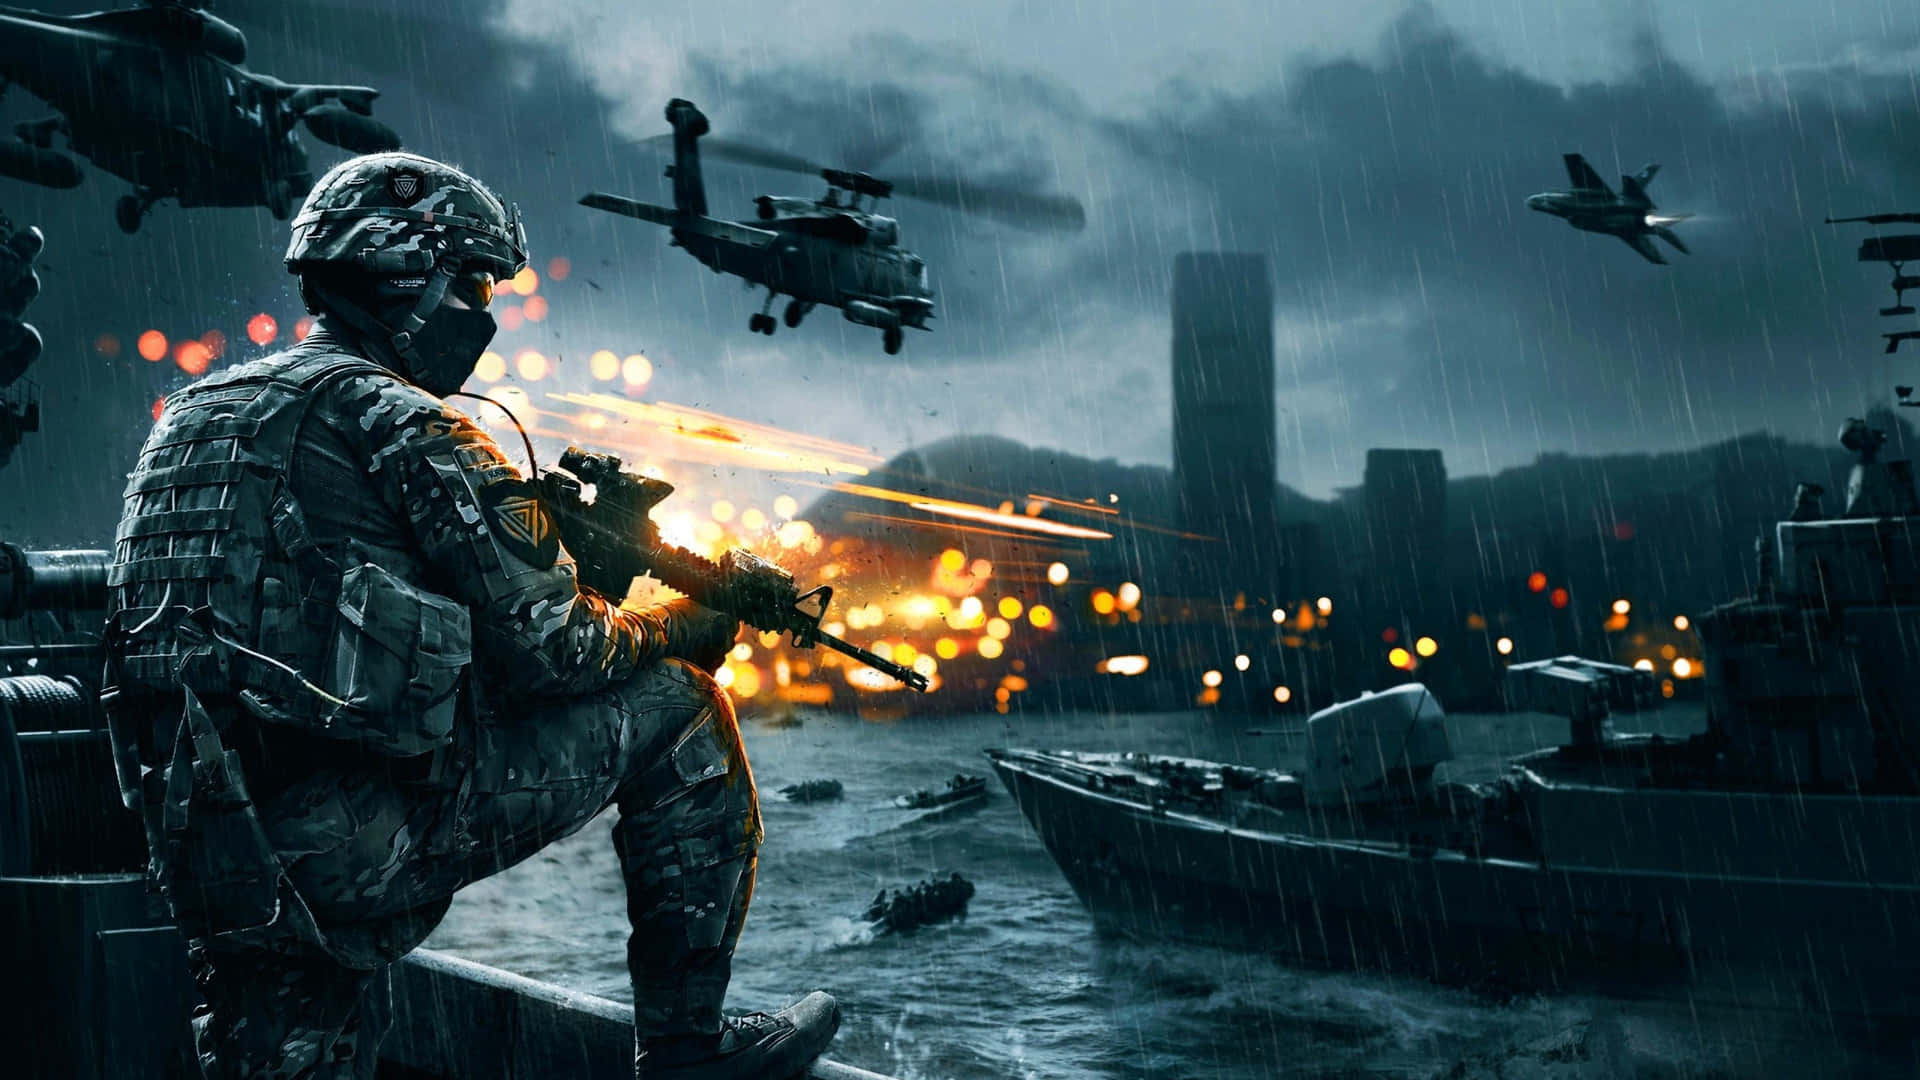 “Battlefield 4 – Outwit Your Opponents to Victory”